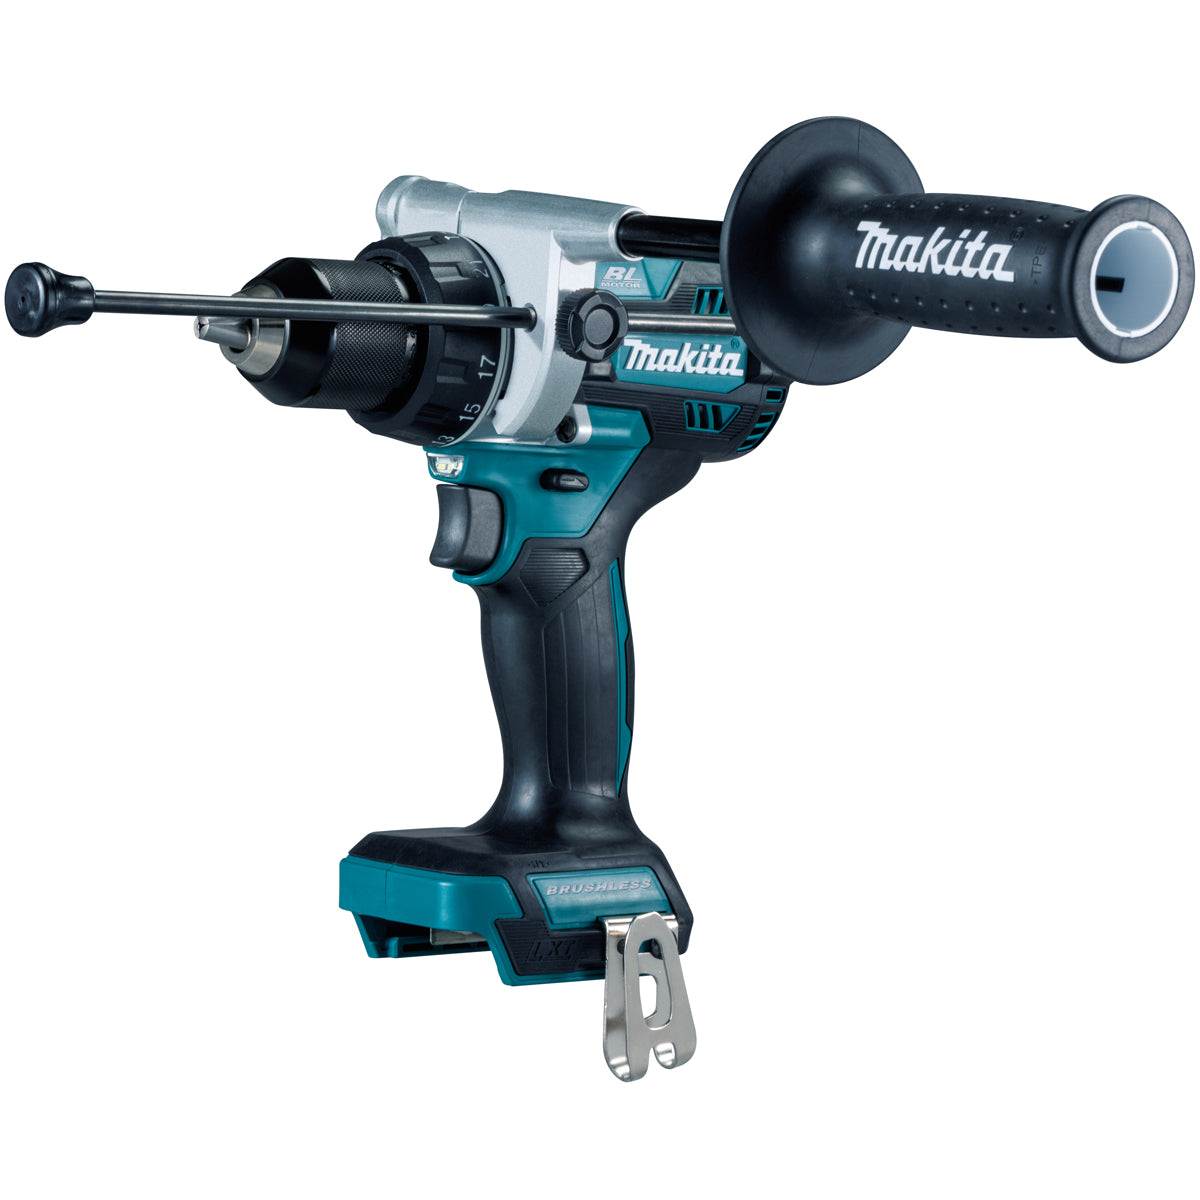 Makita DHP486Z 18V Cordless Brushless 1/2″ Combi Drill with Makpac Type 3 Case